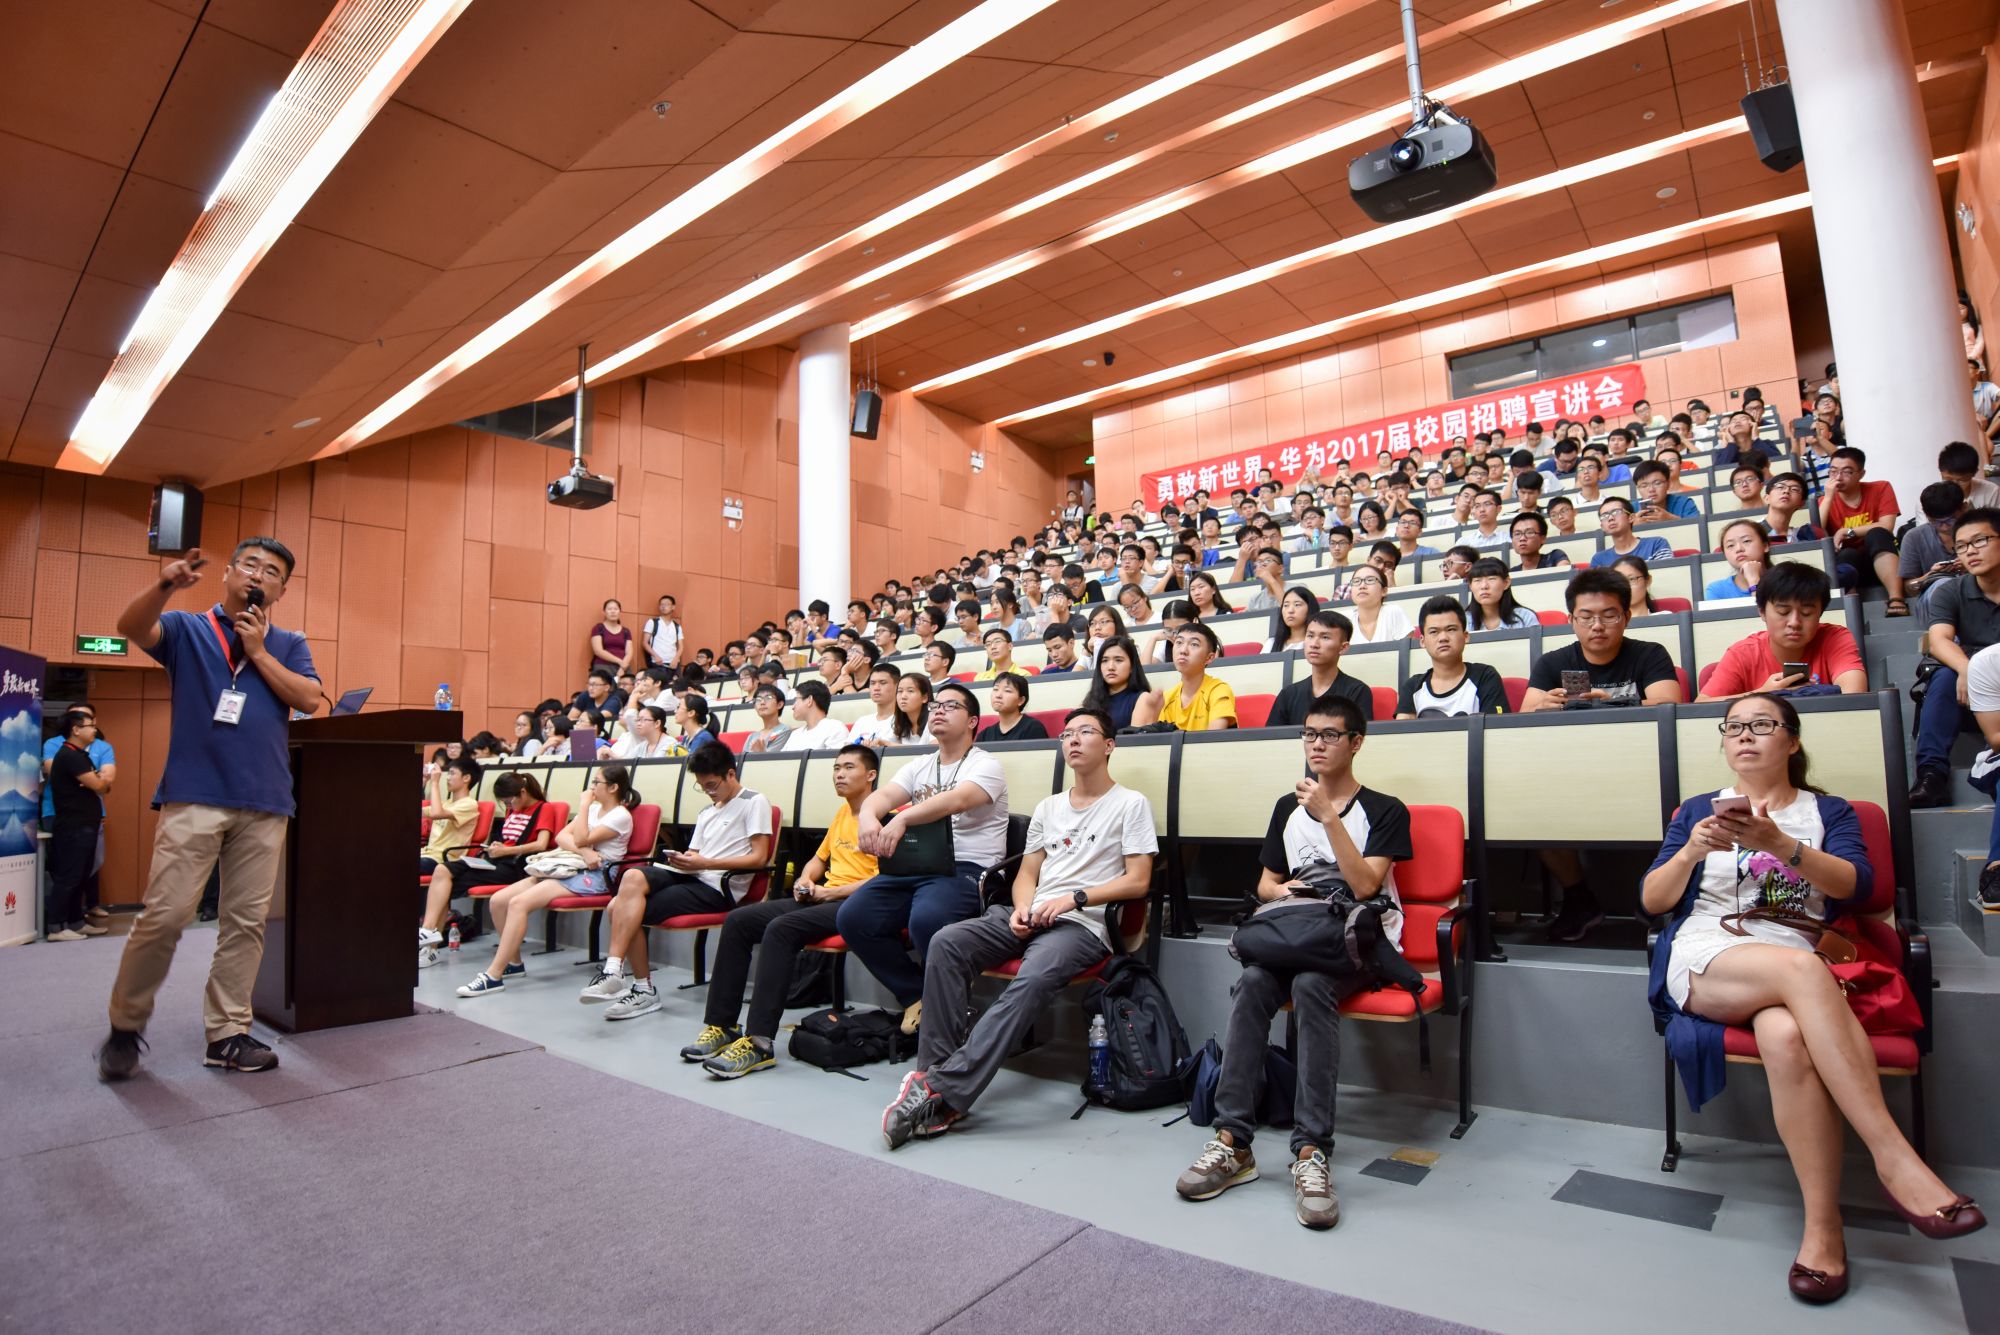 Briefing Session of Huawei Job Fair Held in SUSTech